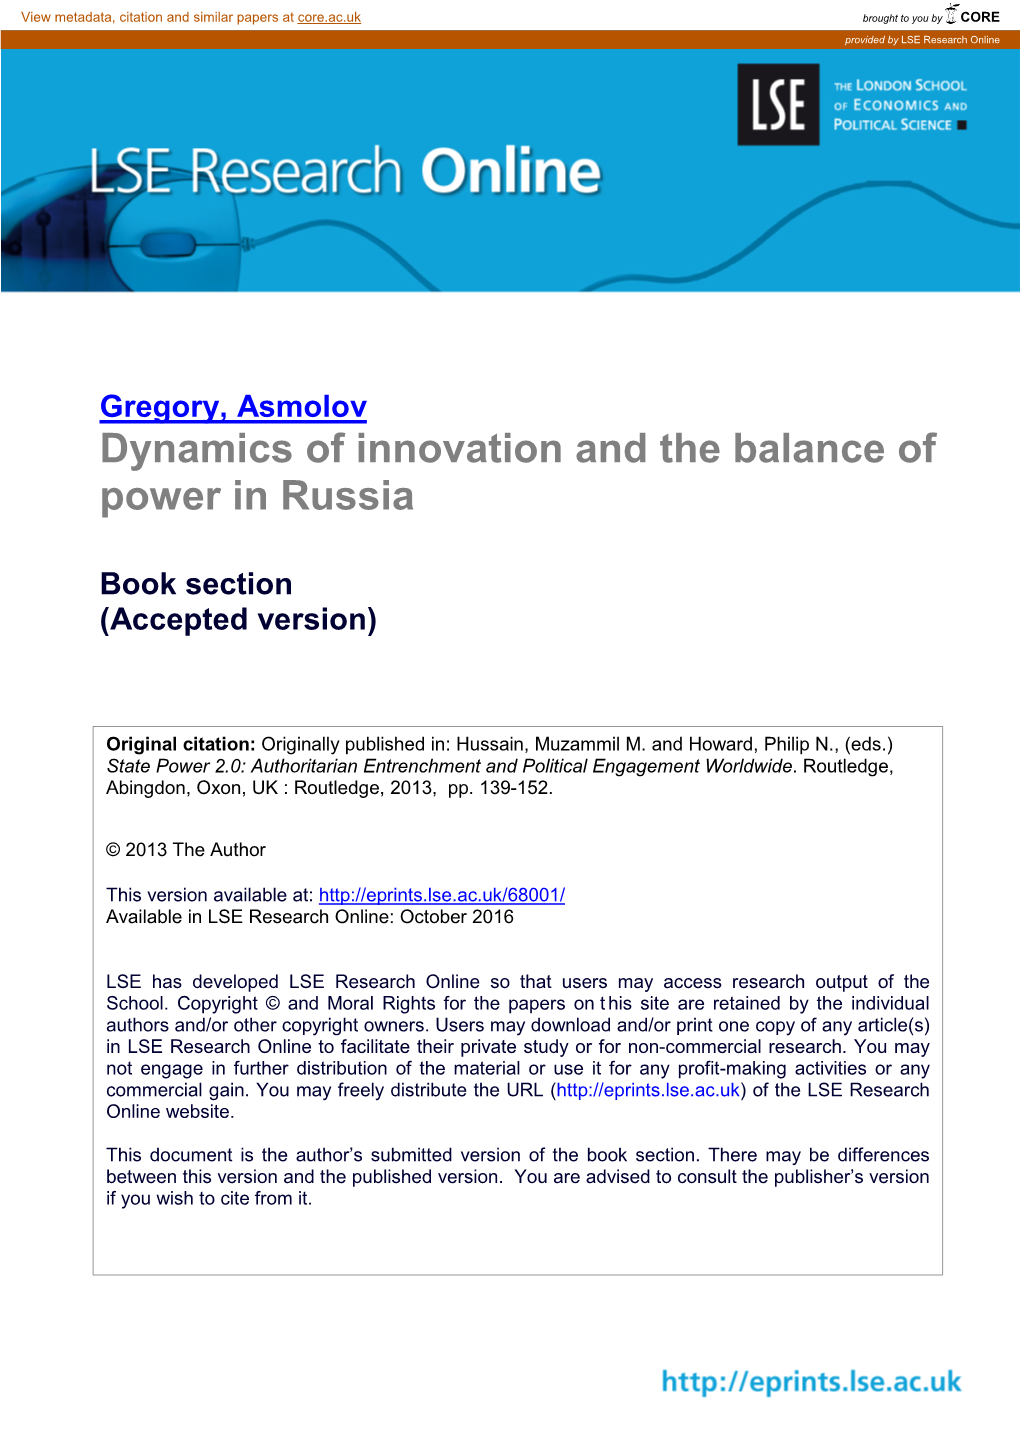 Dynamics of Innovation and the Balance of Power in Russia